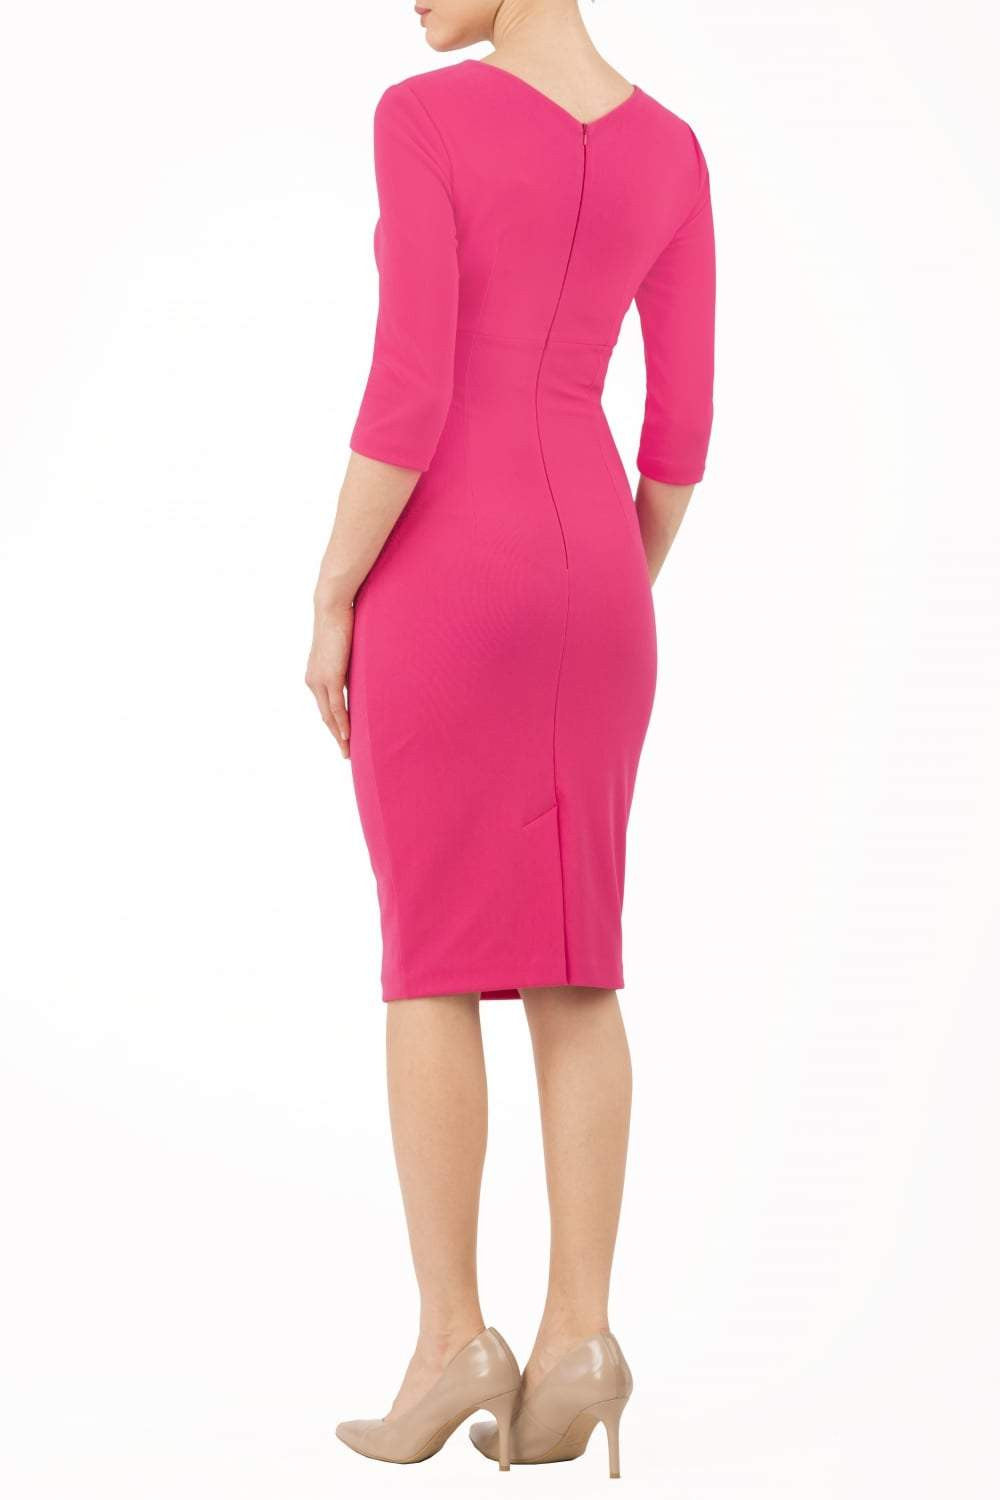 model wearing diva catwalk helston pink pencil dress with sleeves and cut out detail on the neckline back